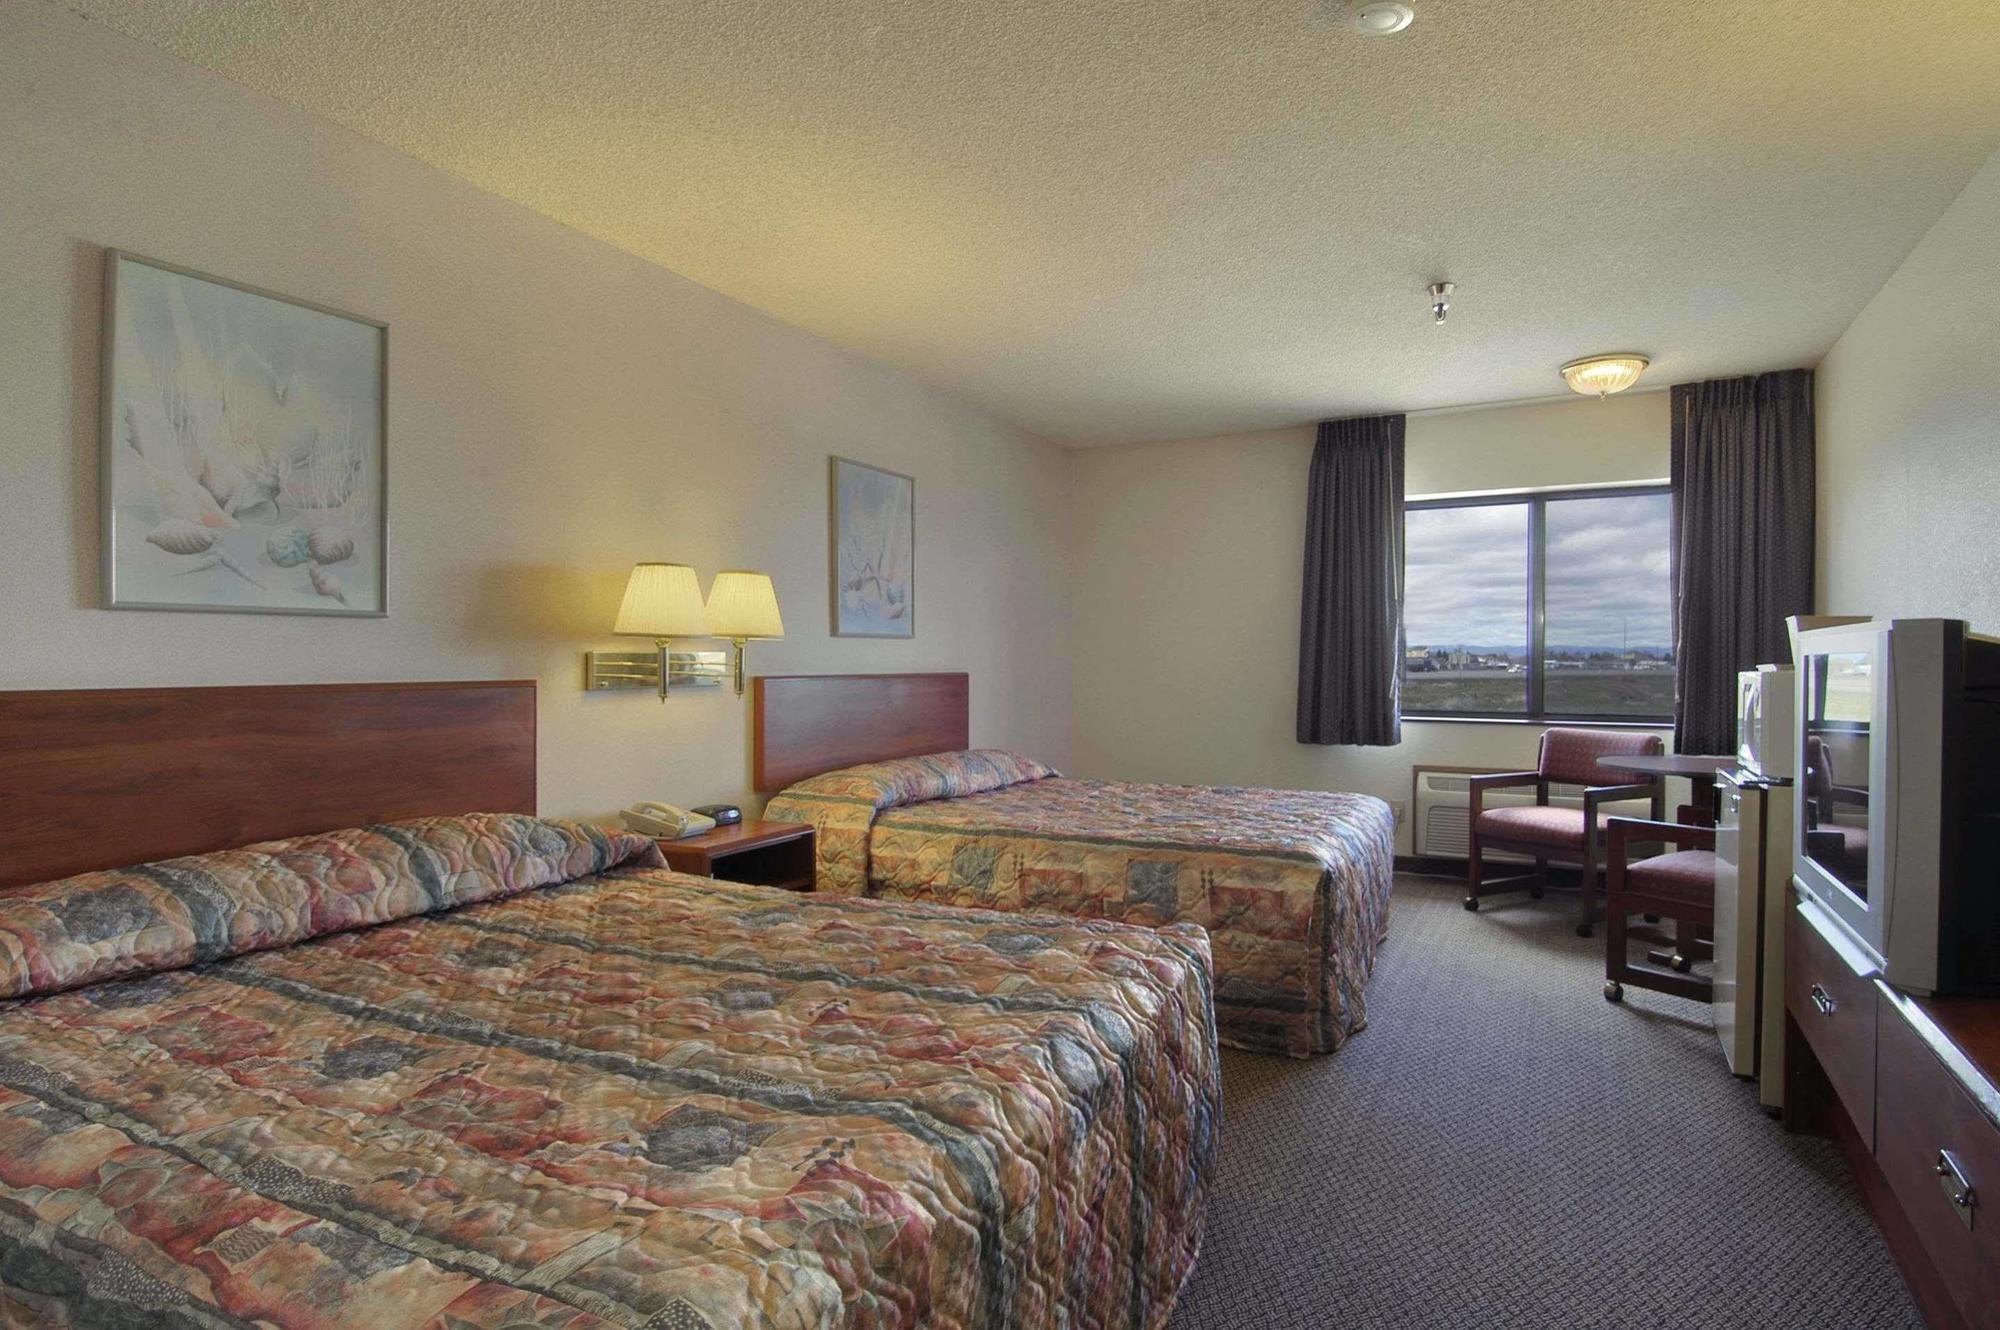 Super 8 By Wyndham Baker City Chambre photo